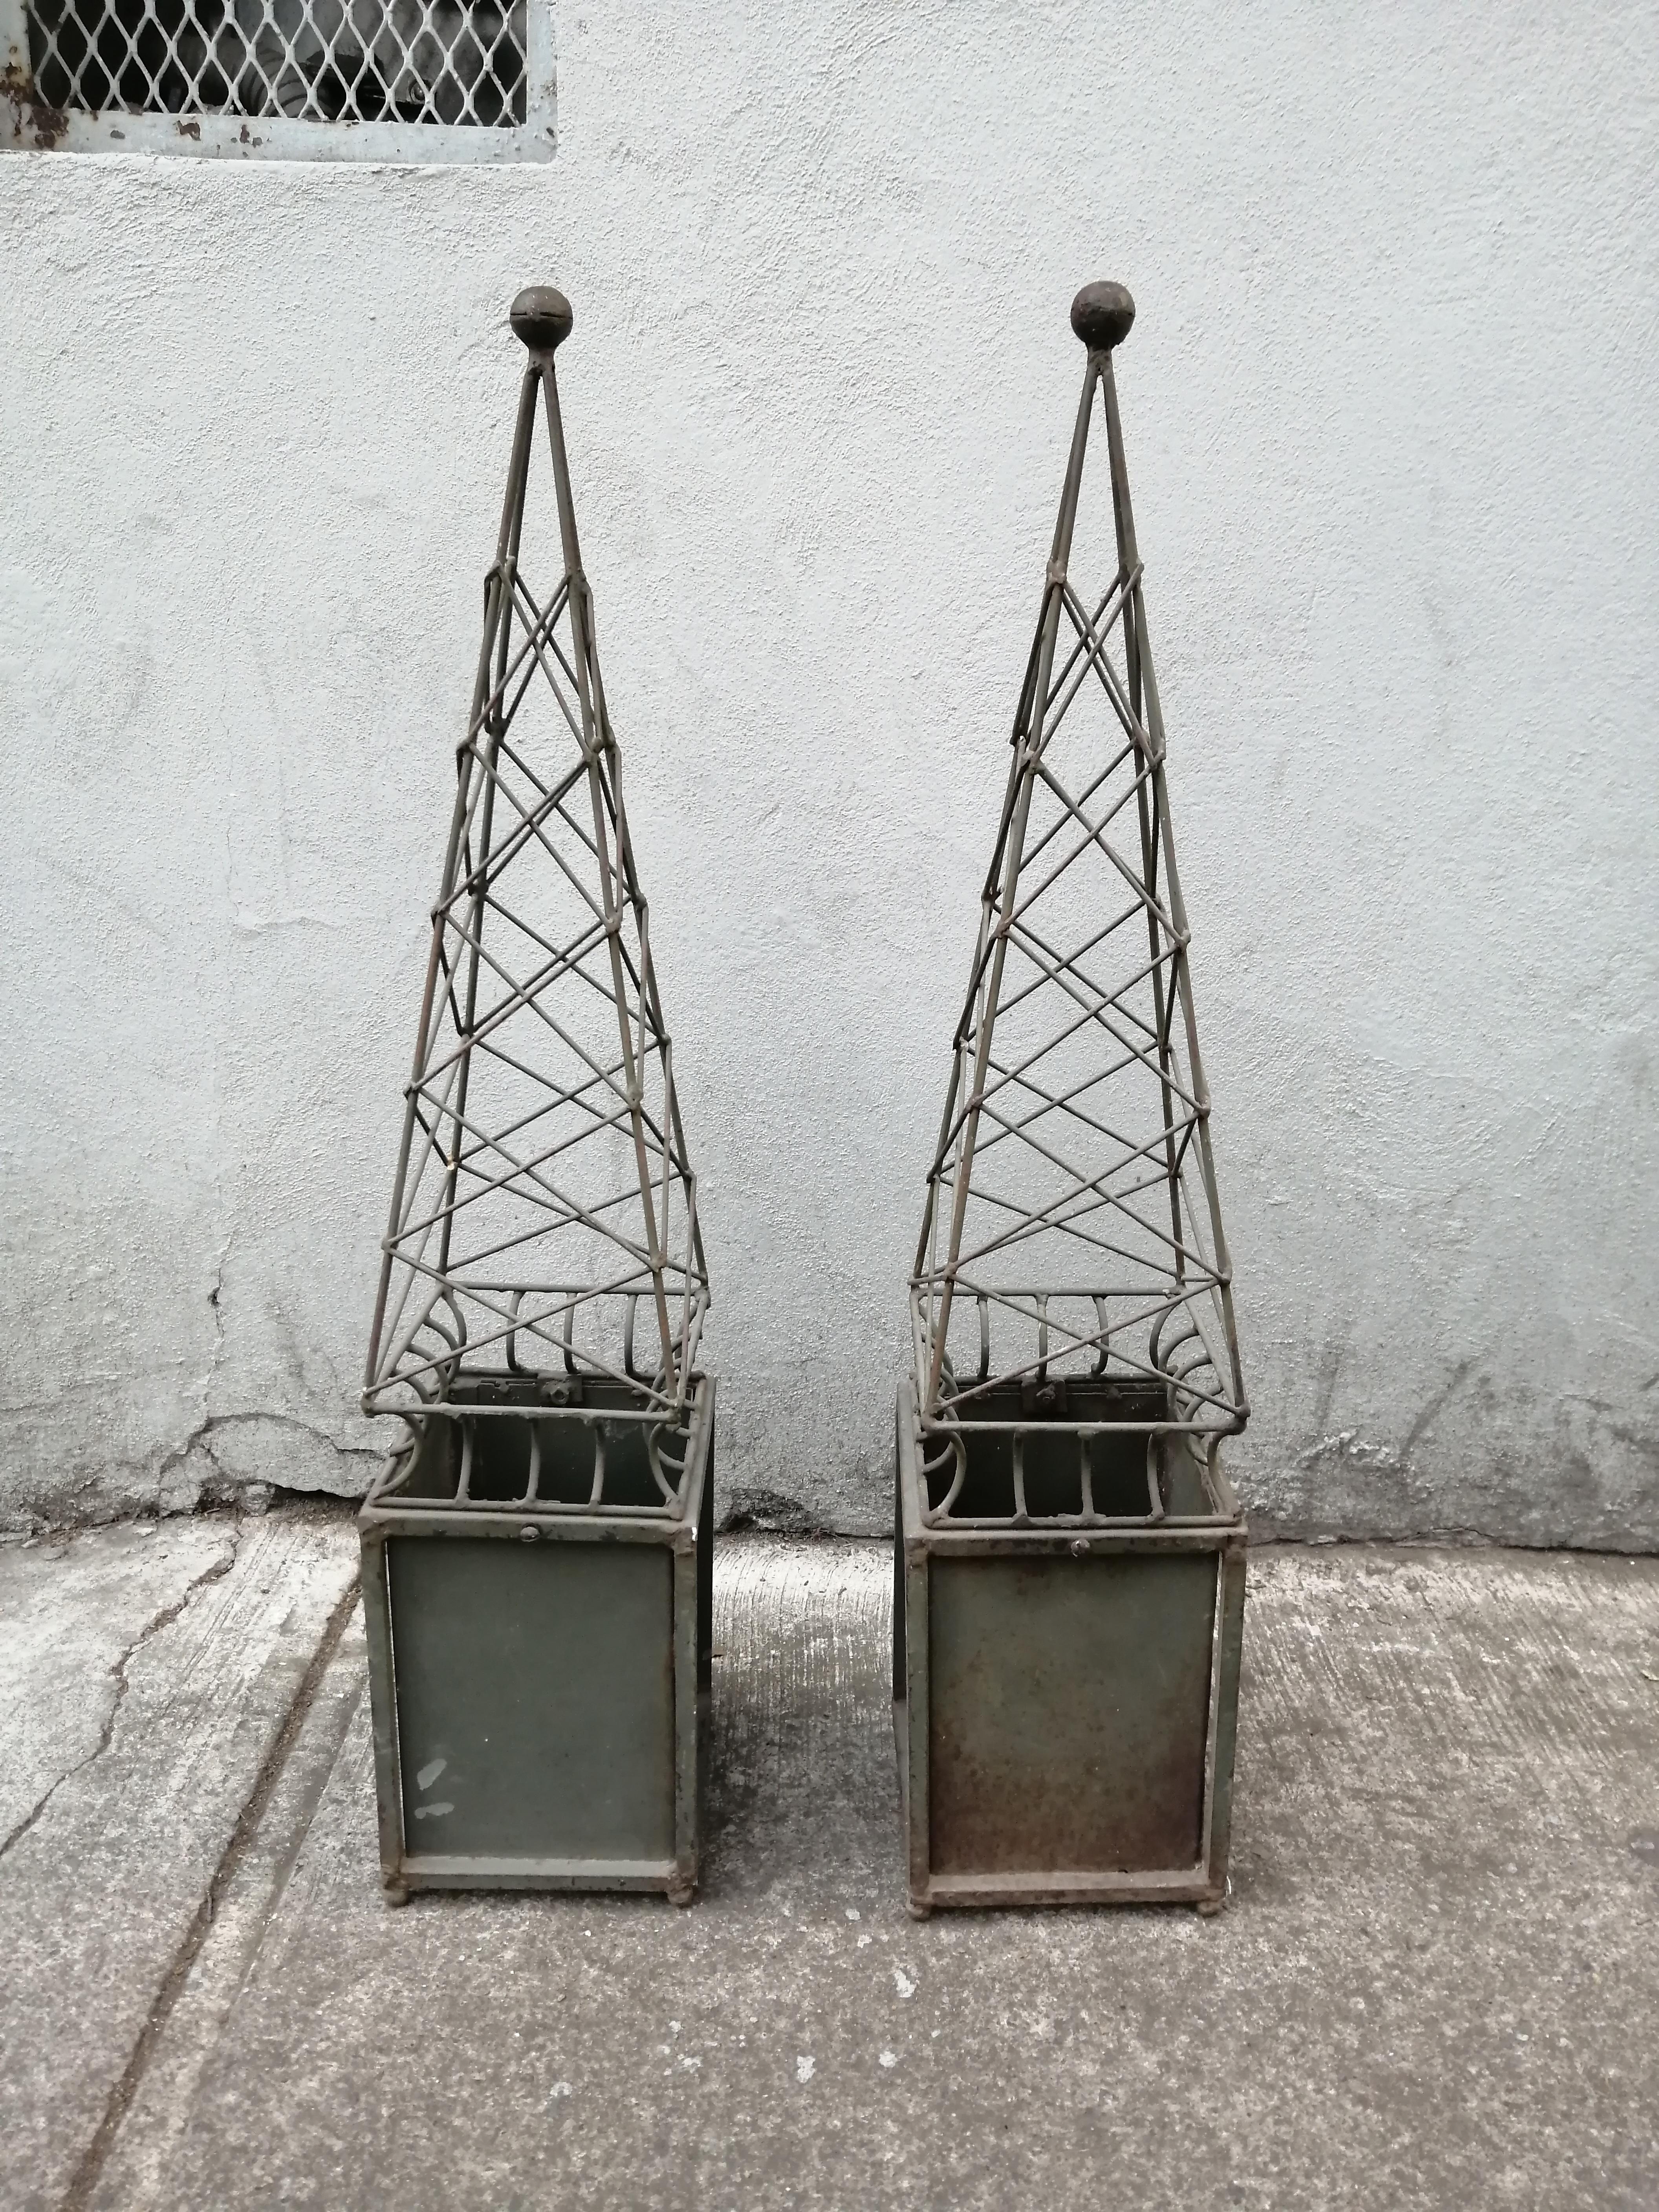 Pair of Mexican Mid-Century Modern iron obelisks. The obelisks show green patina.